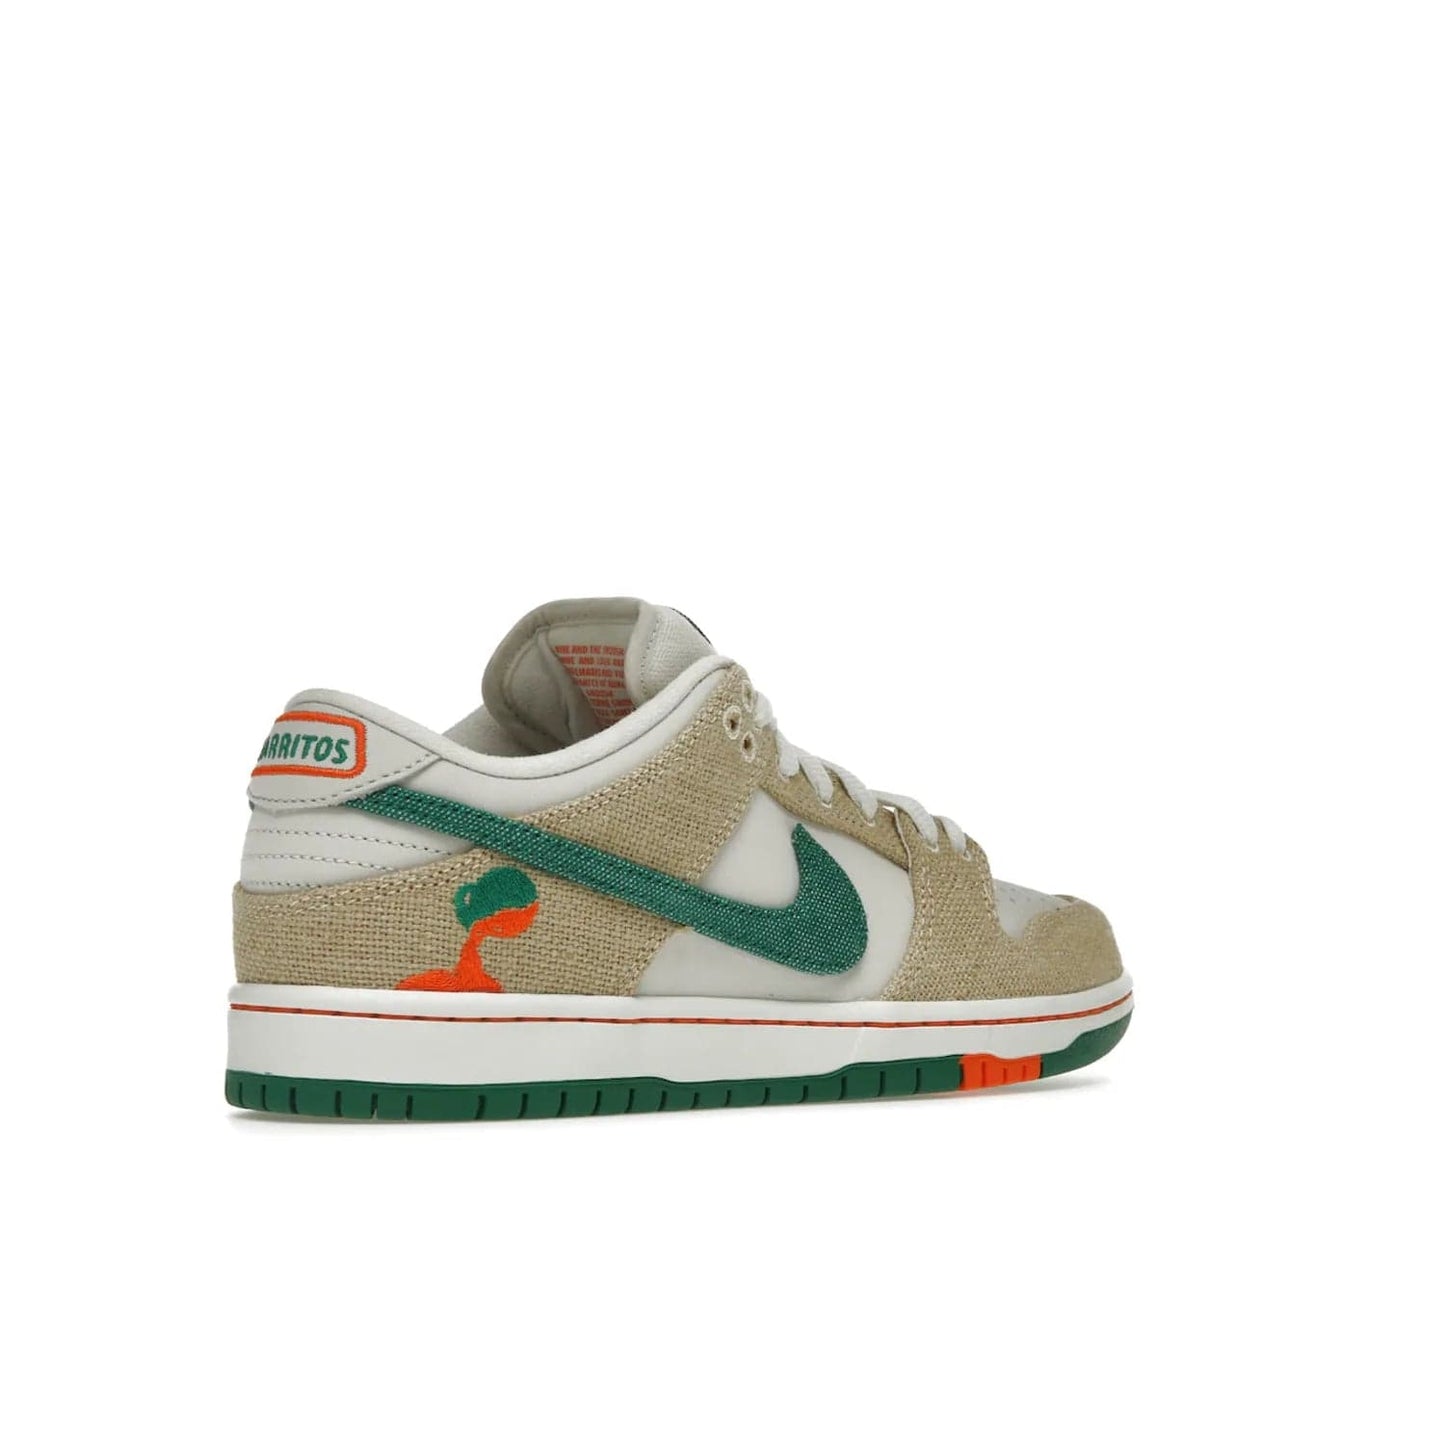 Nike SB Dunk Low Jarritos - Image 33 - Only at www.BallersClubKickz.com - Shop limited edition Nike SB Dunk Low Jarritos! Crafted with white leather and tear-away canvas materials with green accents. Includes orange, green, and white laces to customize your look. Available now.